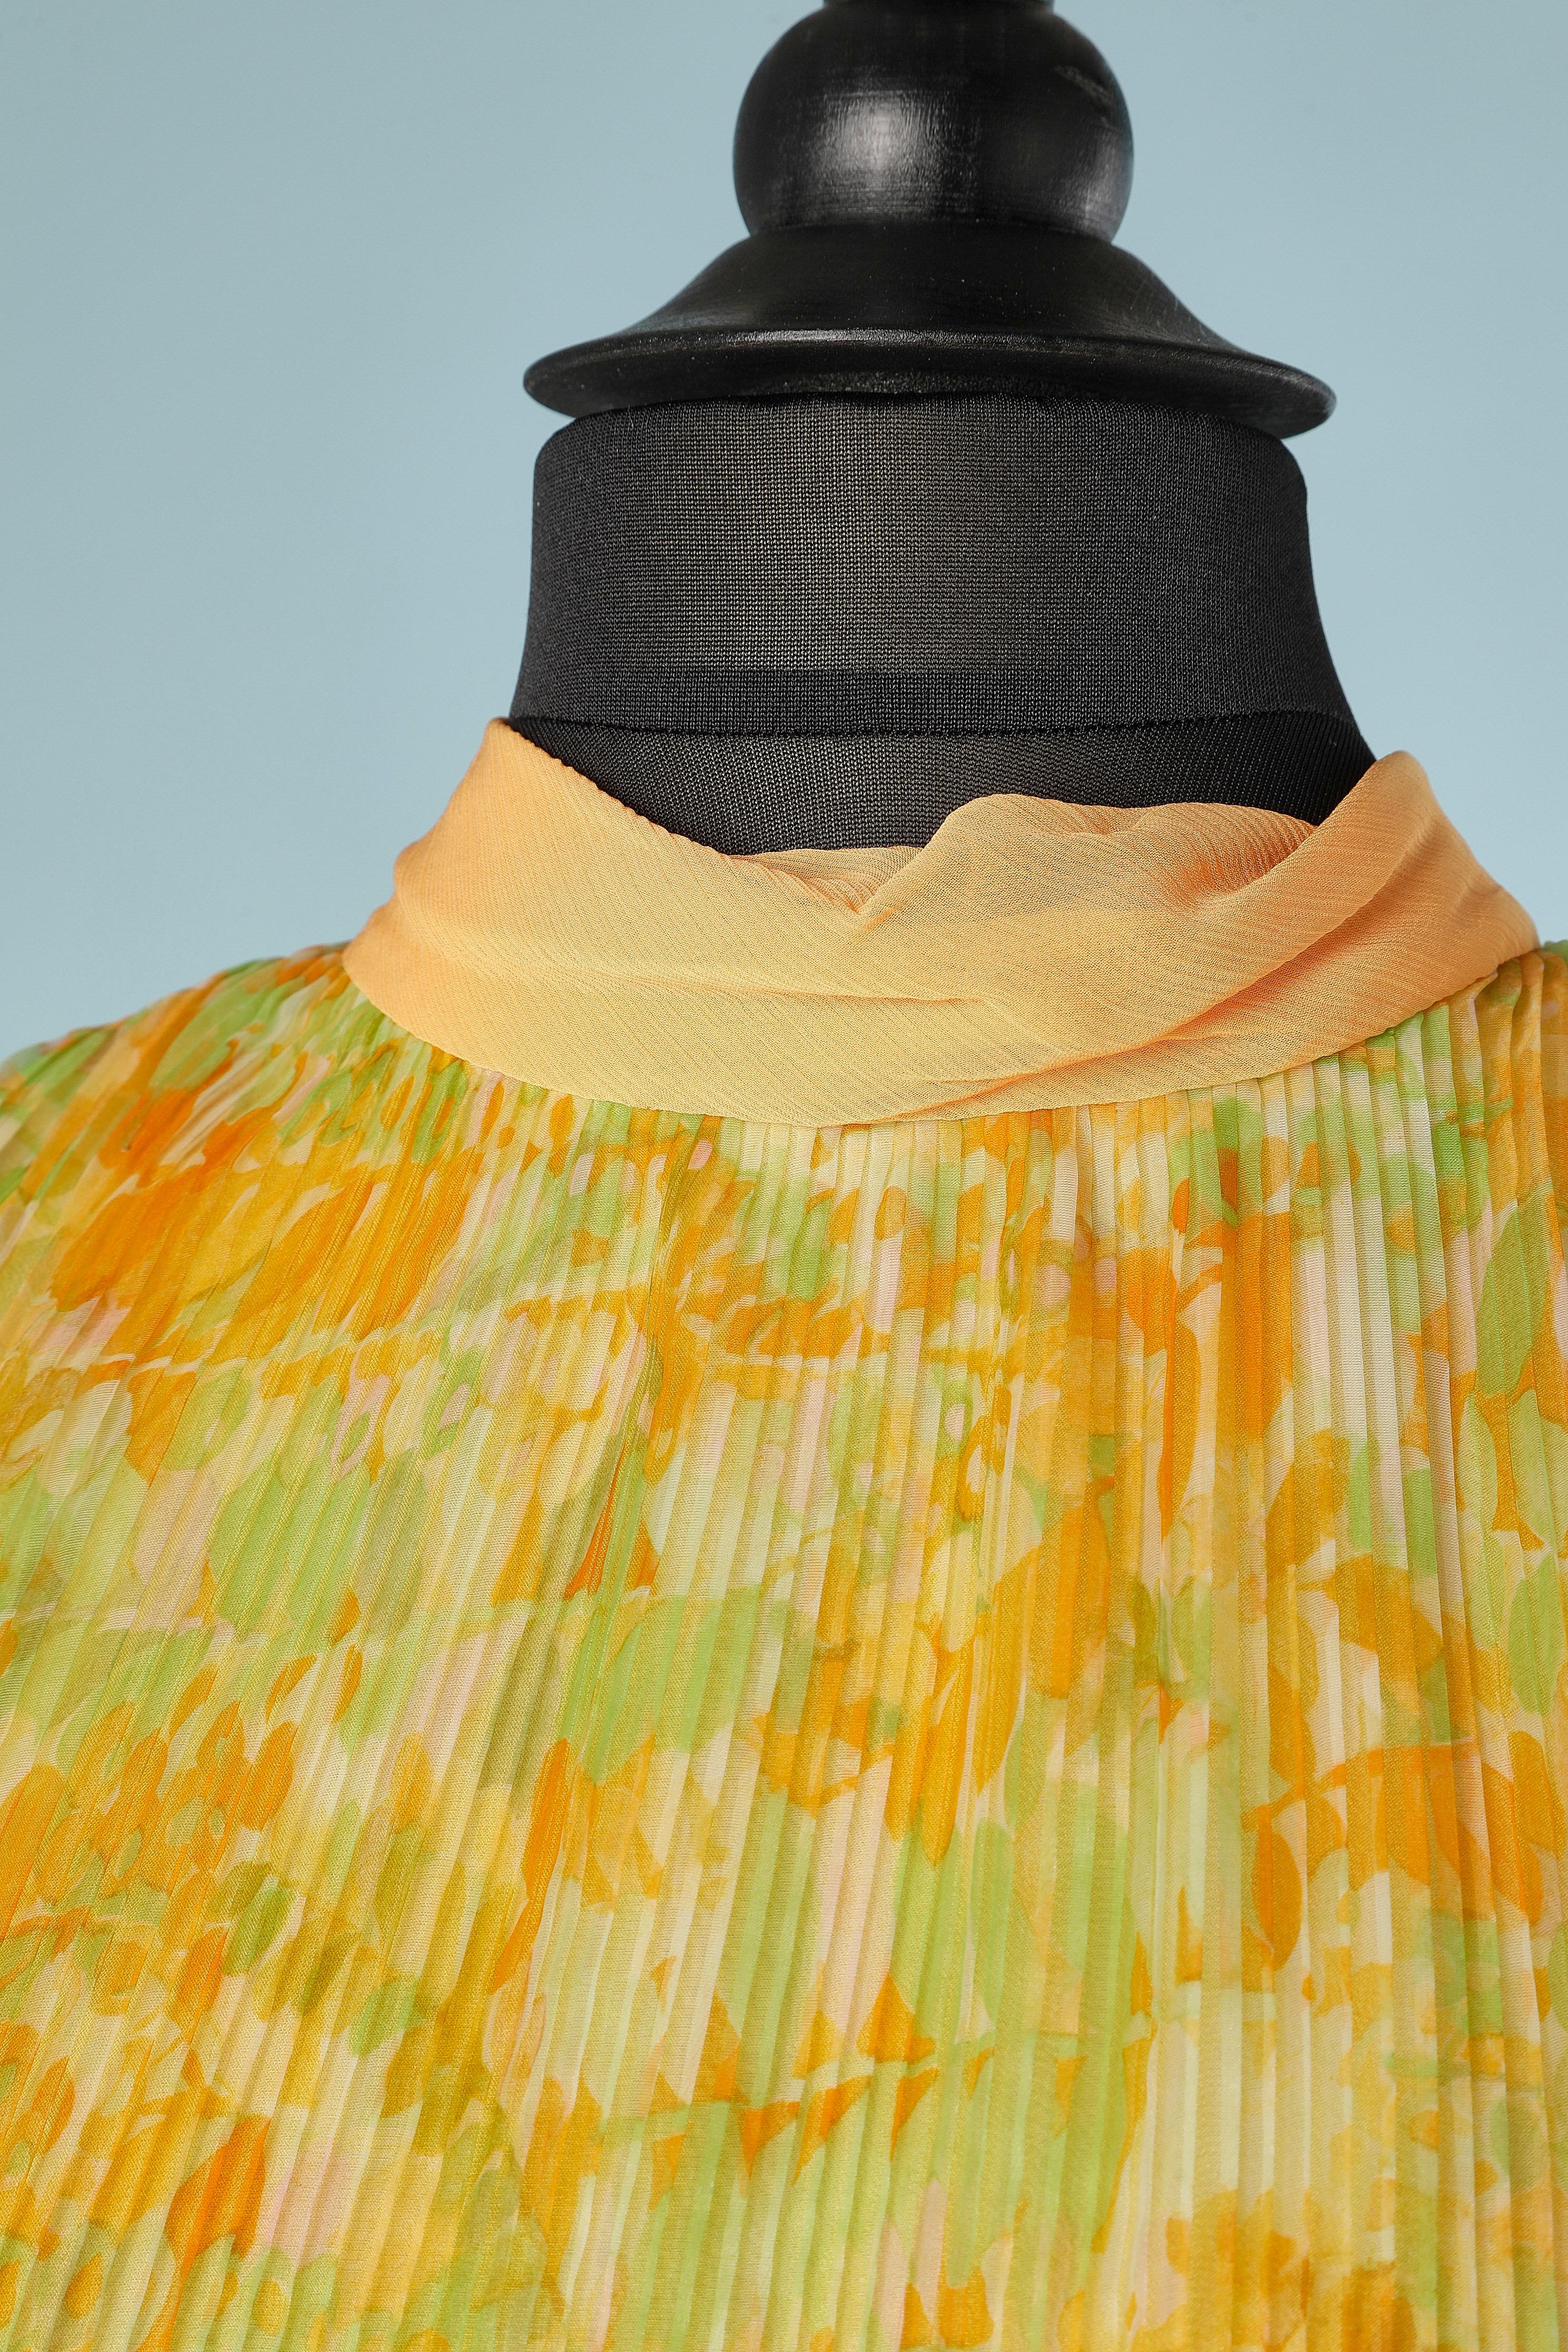 Nylon orange and green flower print with sunray pleats and chiffon neck (TIGHT BEHIND THE NECK) Acétate lining.
SIZE M
